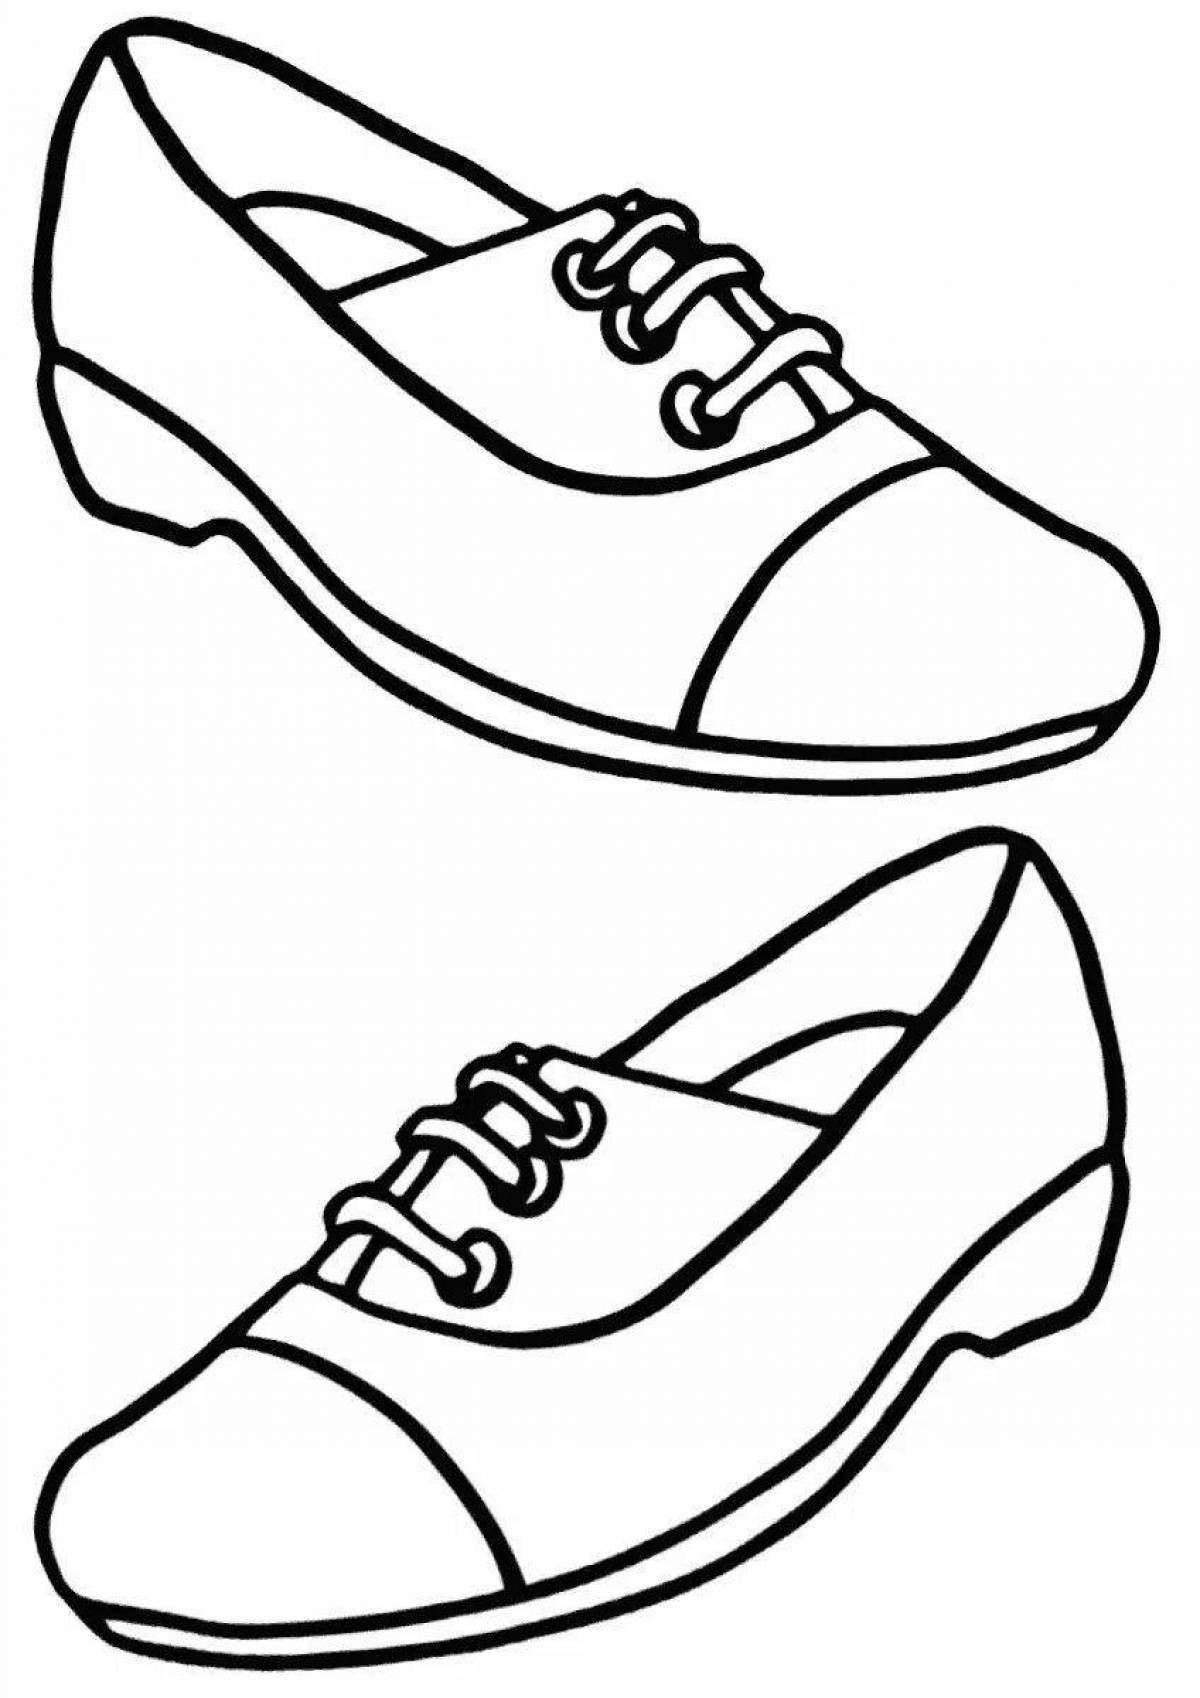 Coloring page humorous shoes for girls